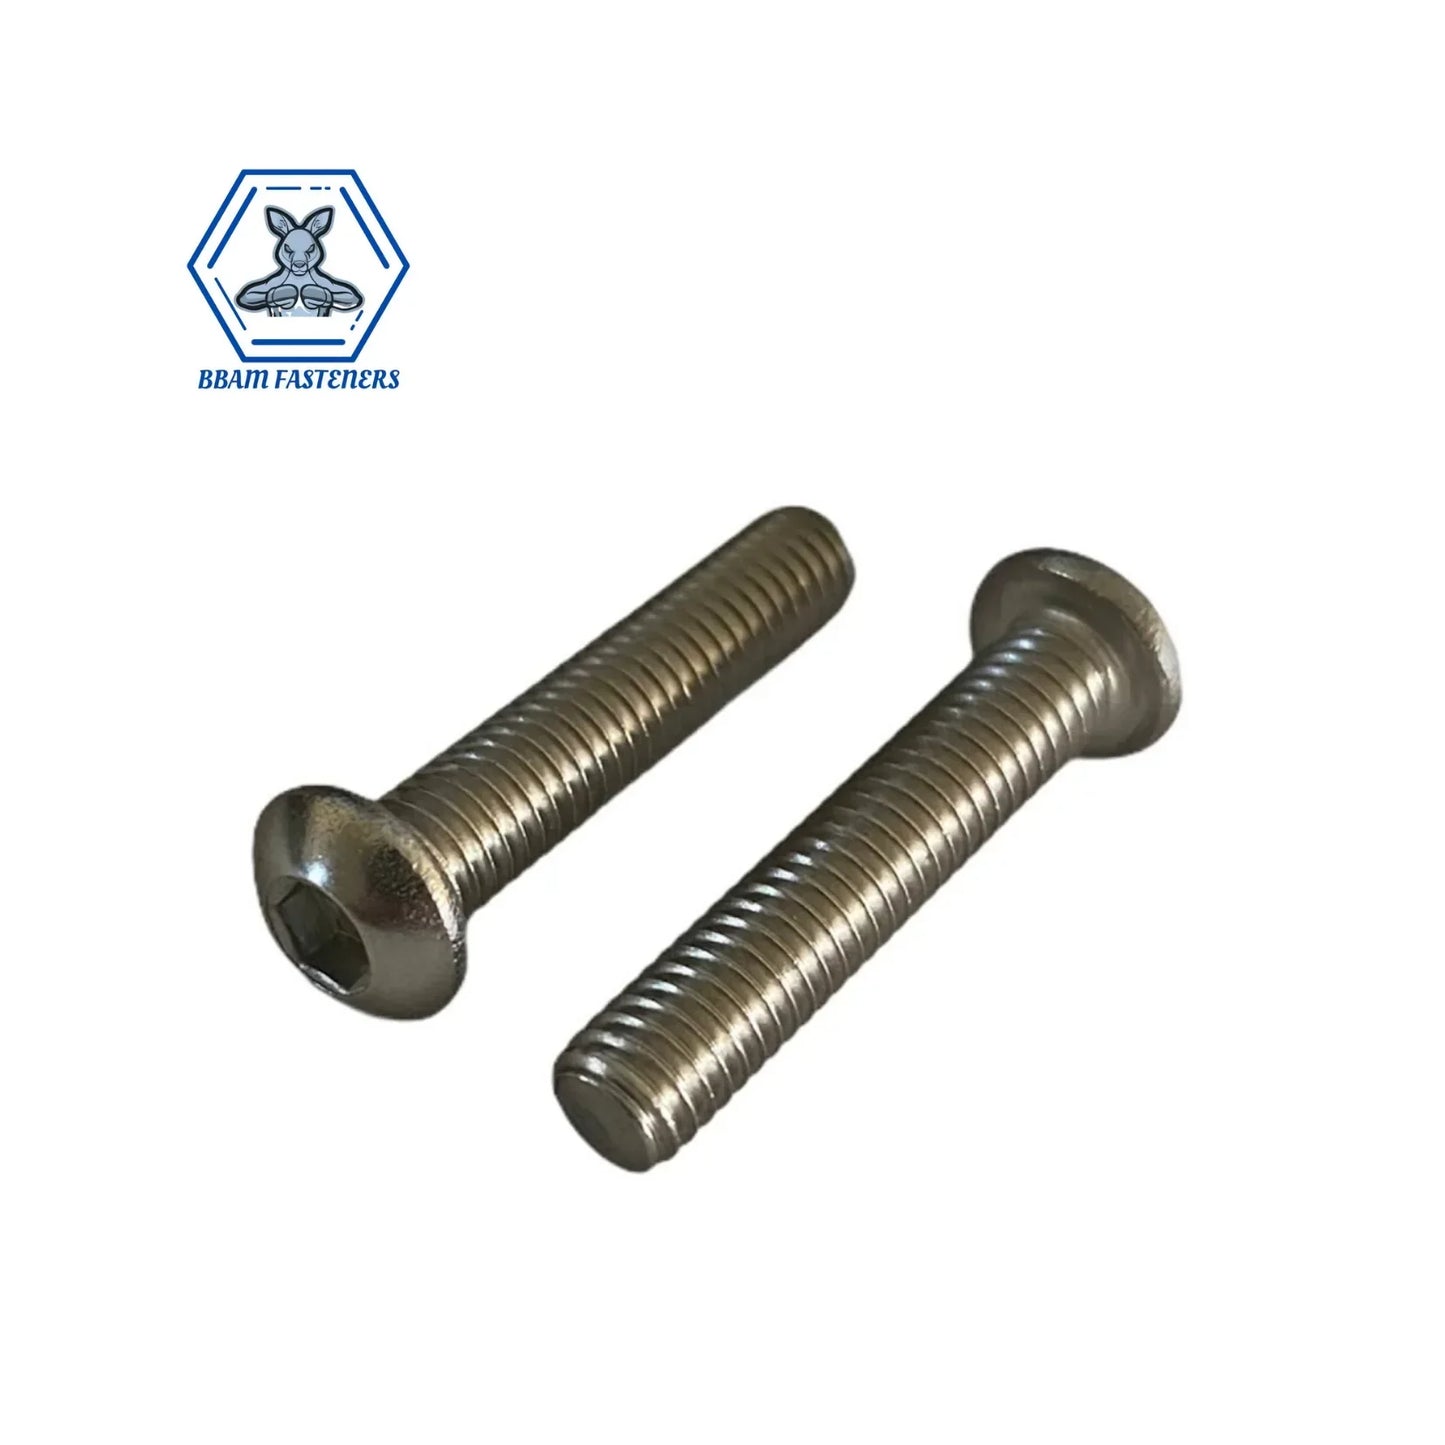 5/16" x 3/4" UNC Button Socket Screw 304 Stainless Steel